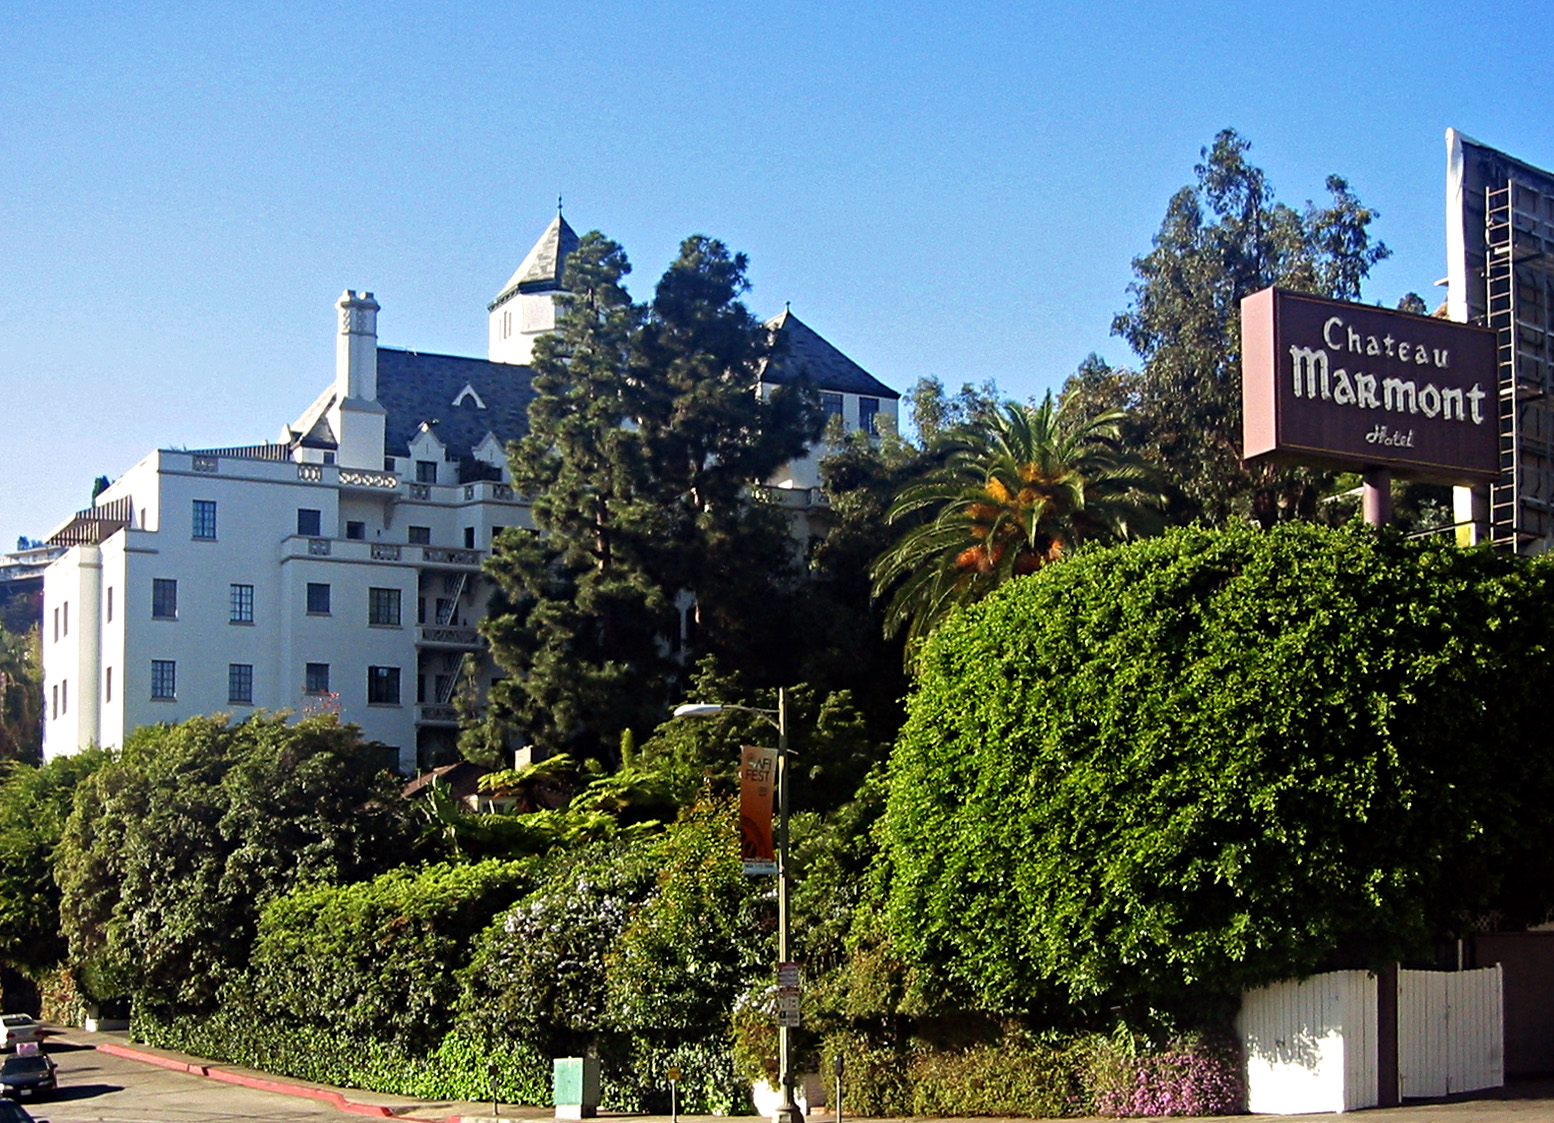 A daytime look at the iconic hotel the Chateau marmont.